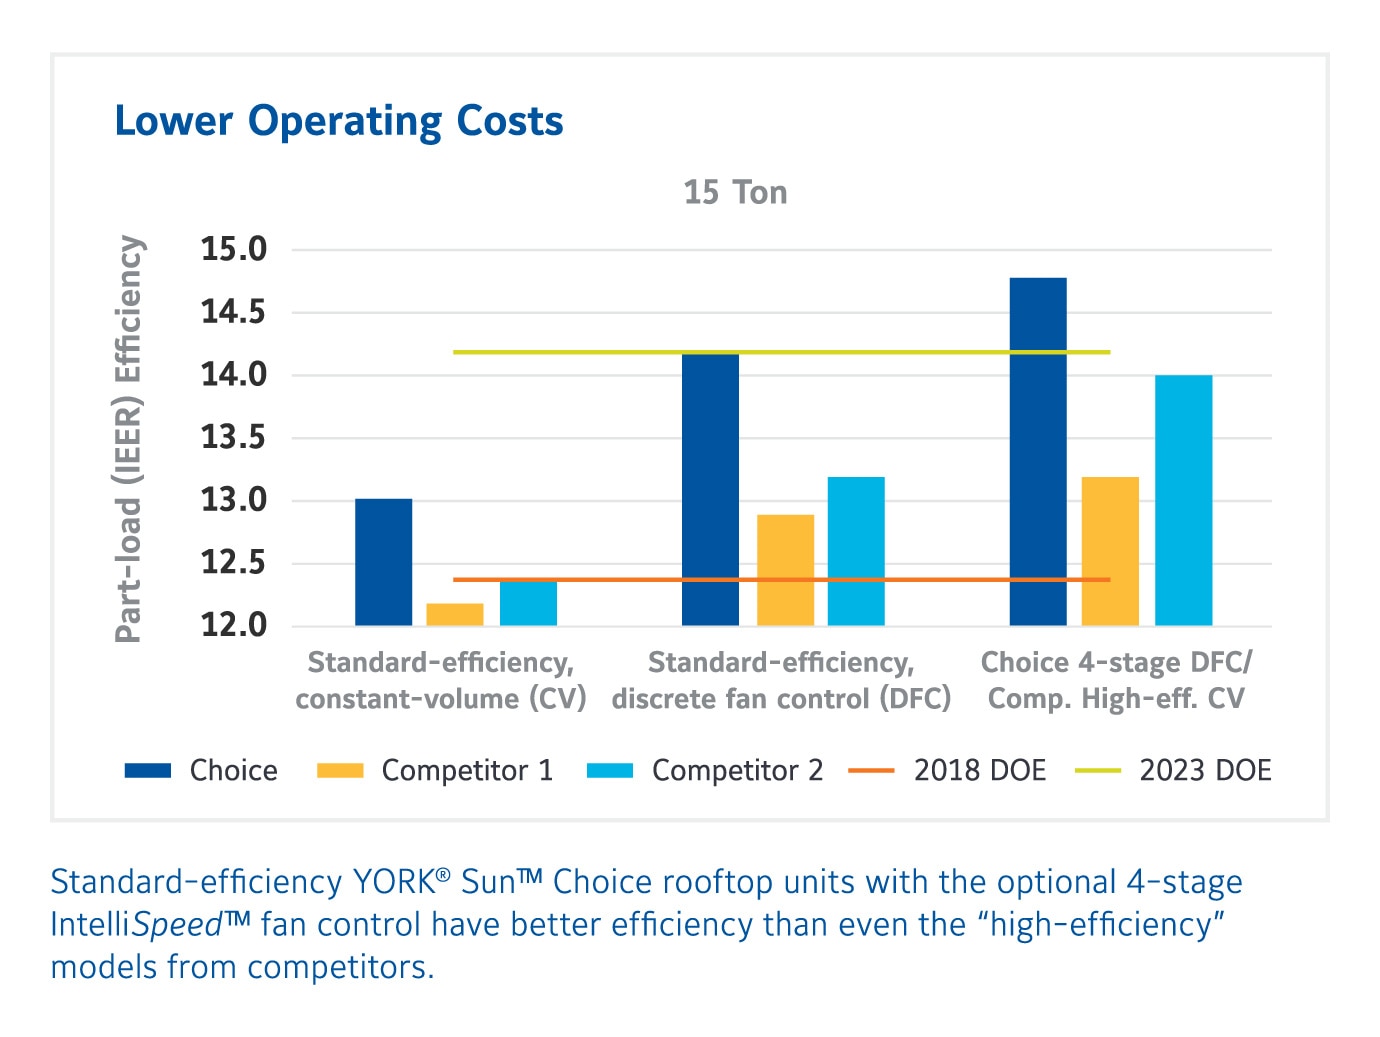 Bar chart showing how the YORK Sun Choice rooftop unit achieves a higher part-load (IEER) efficiency than competitors.